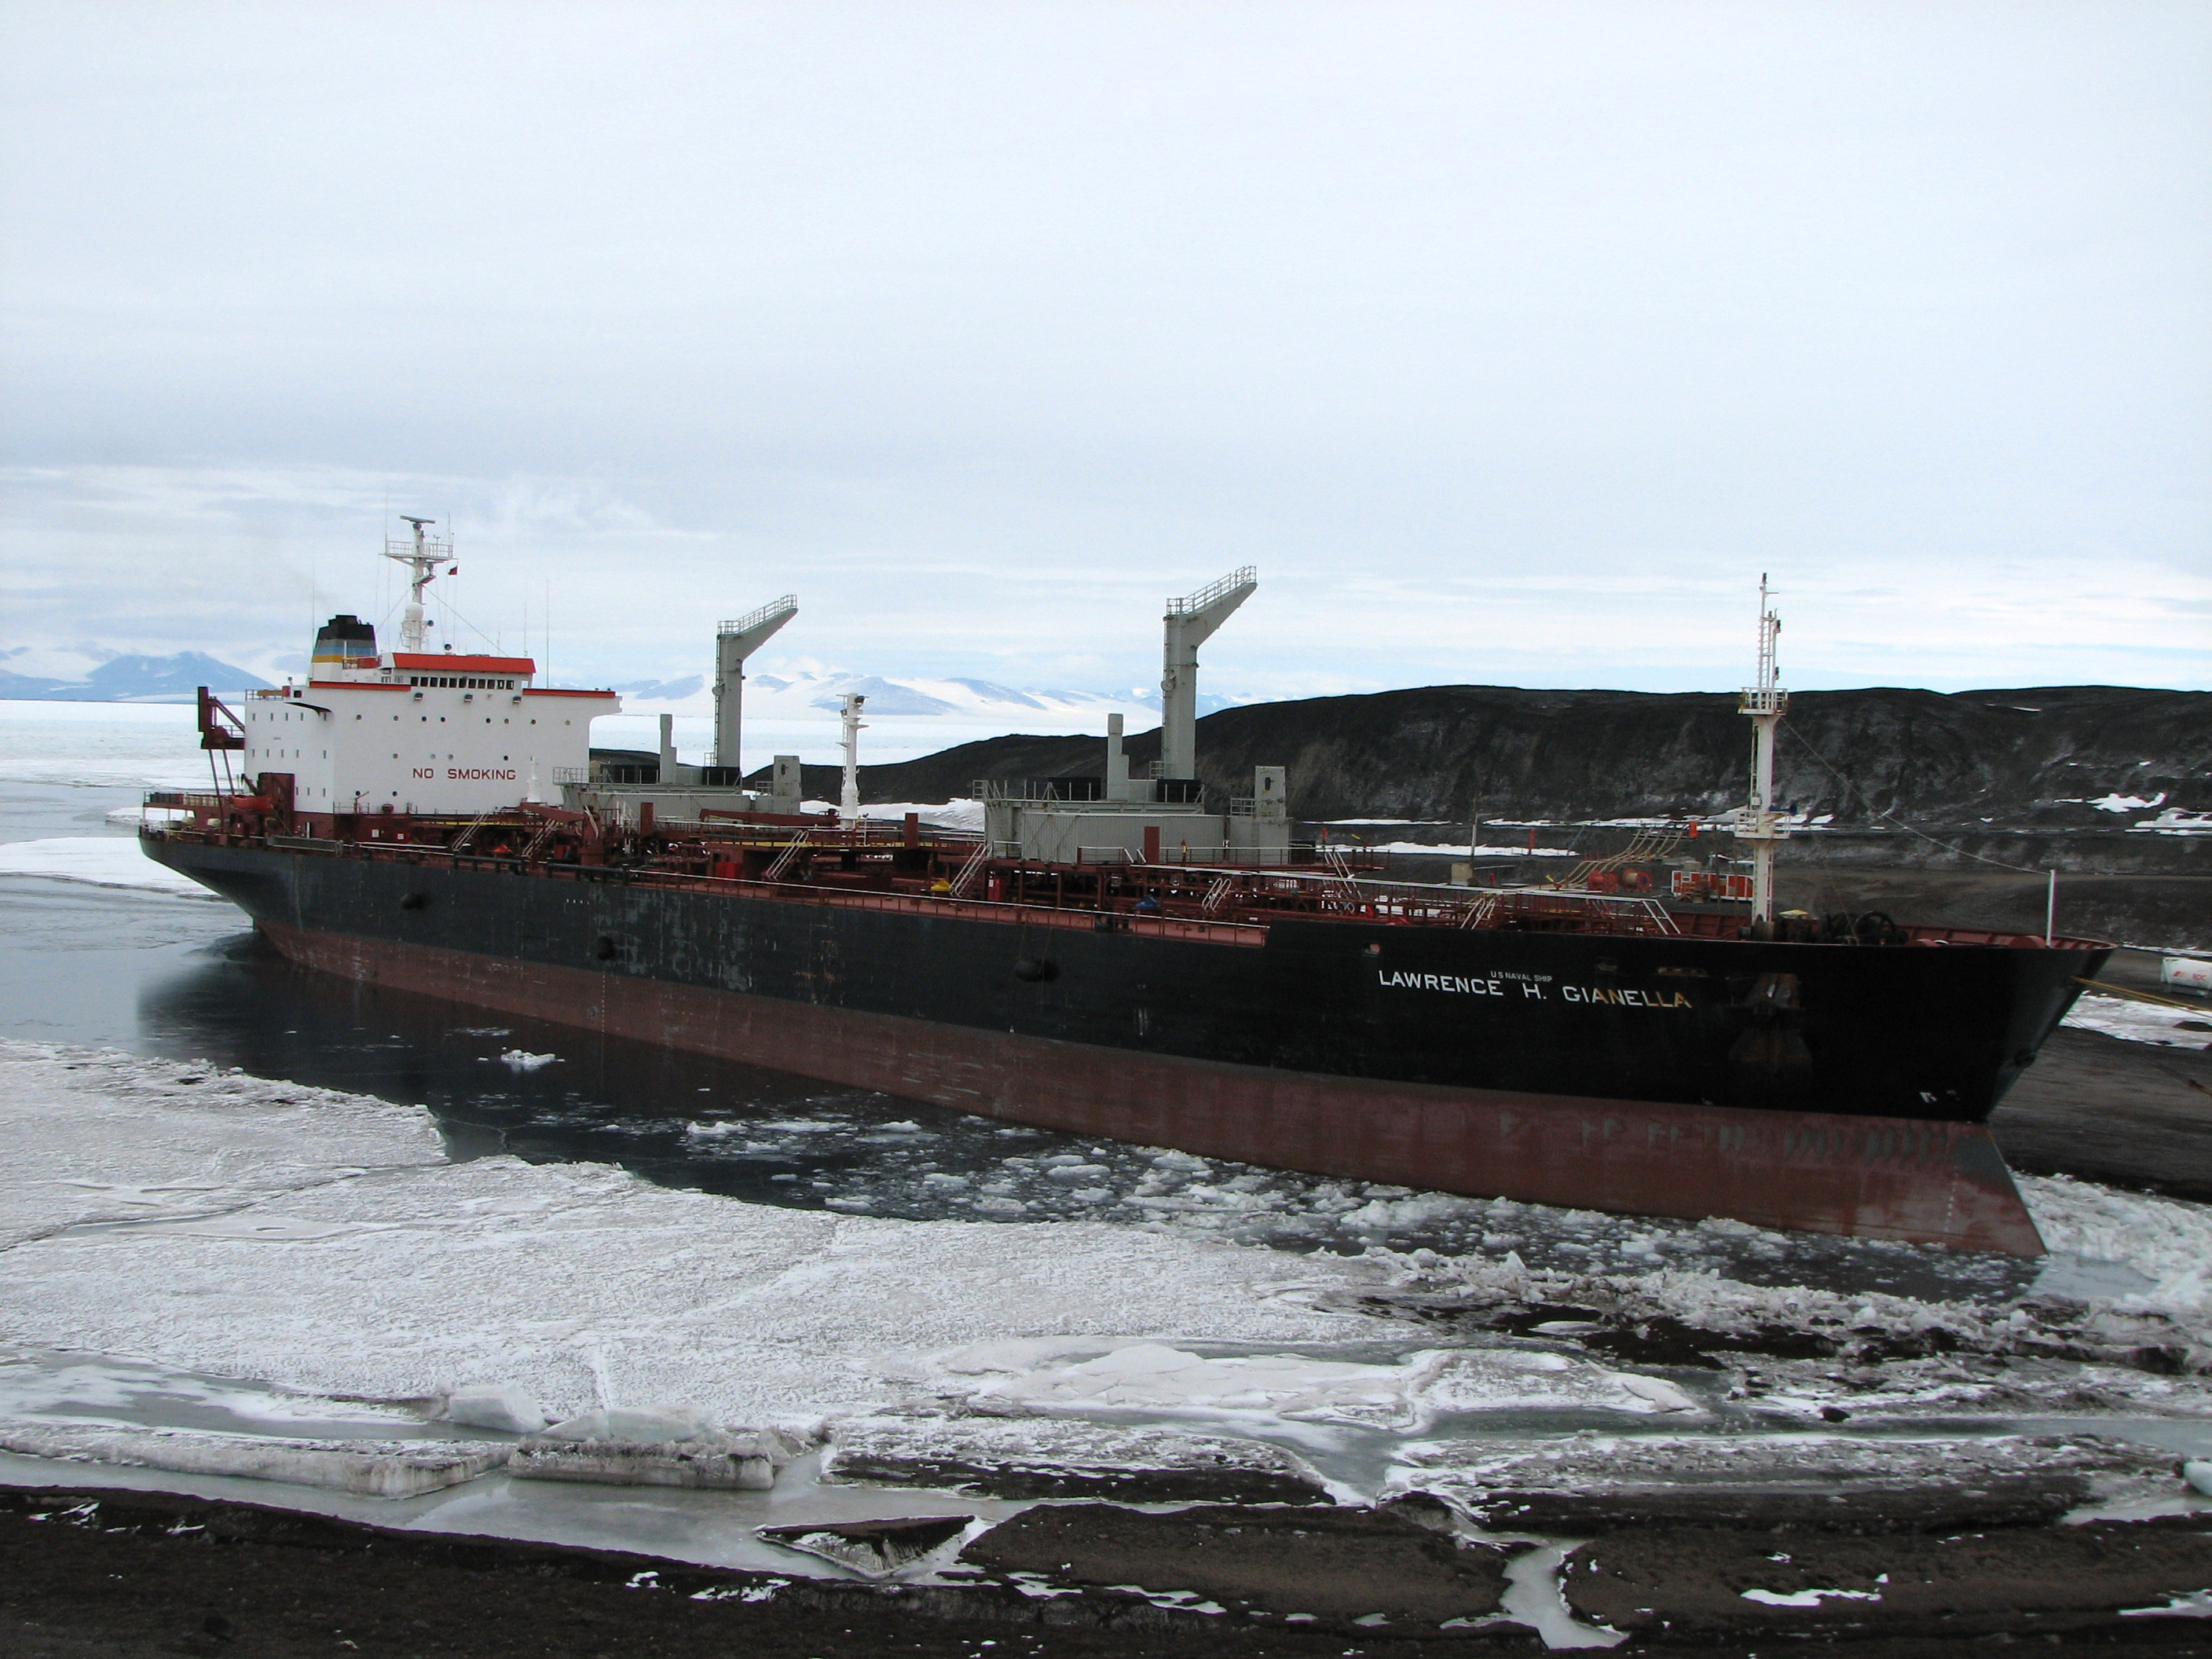 Ship moors in icy water.